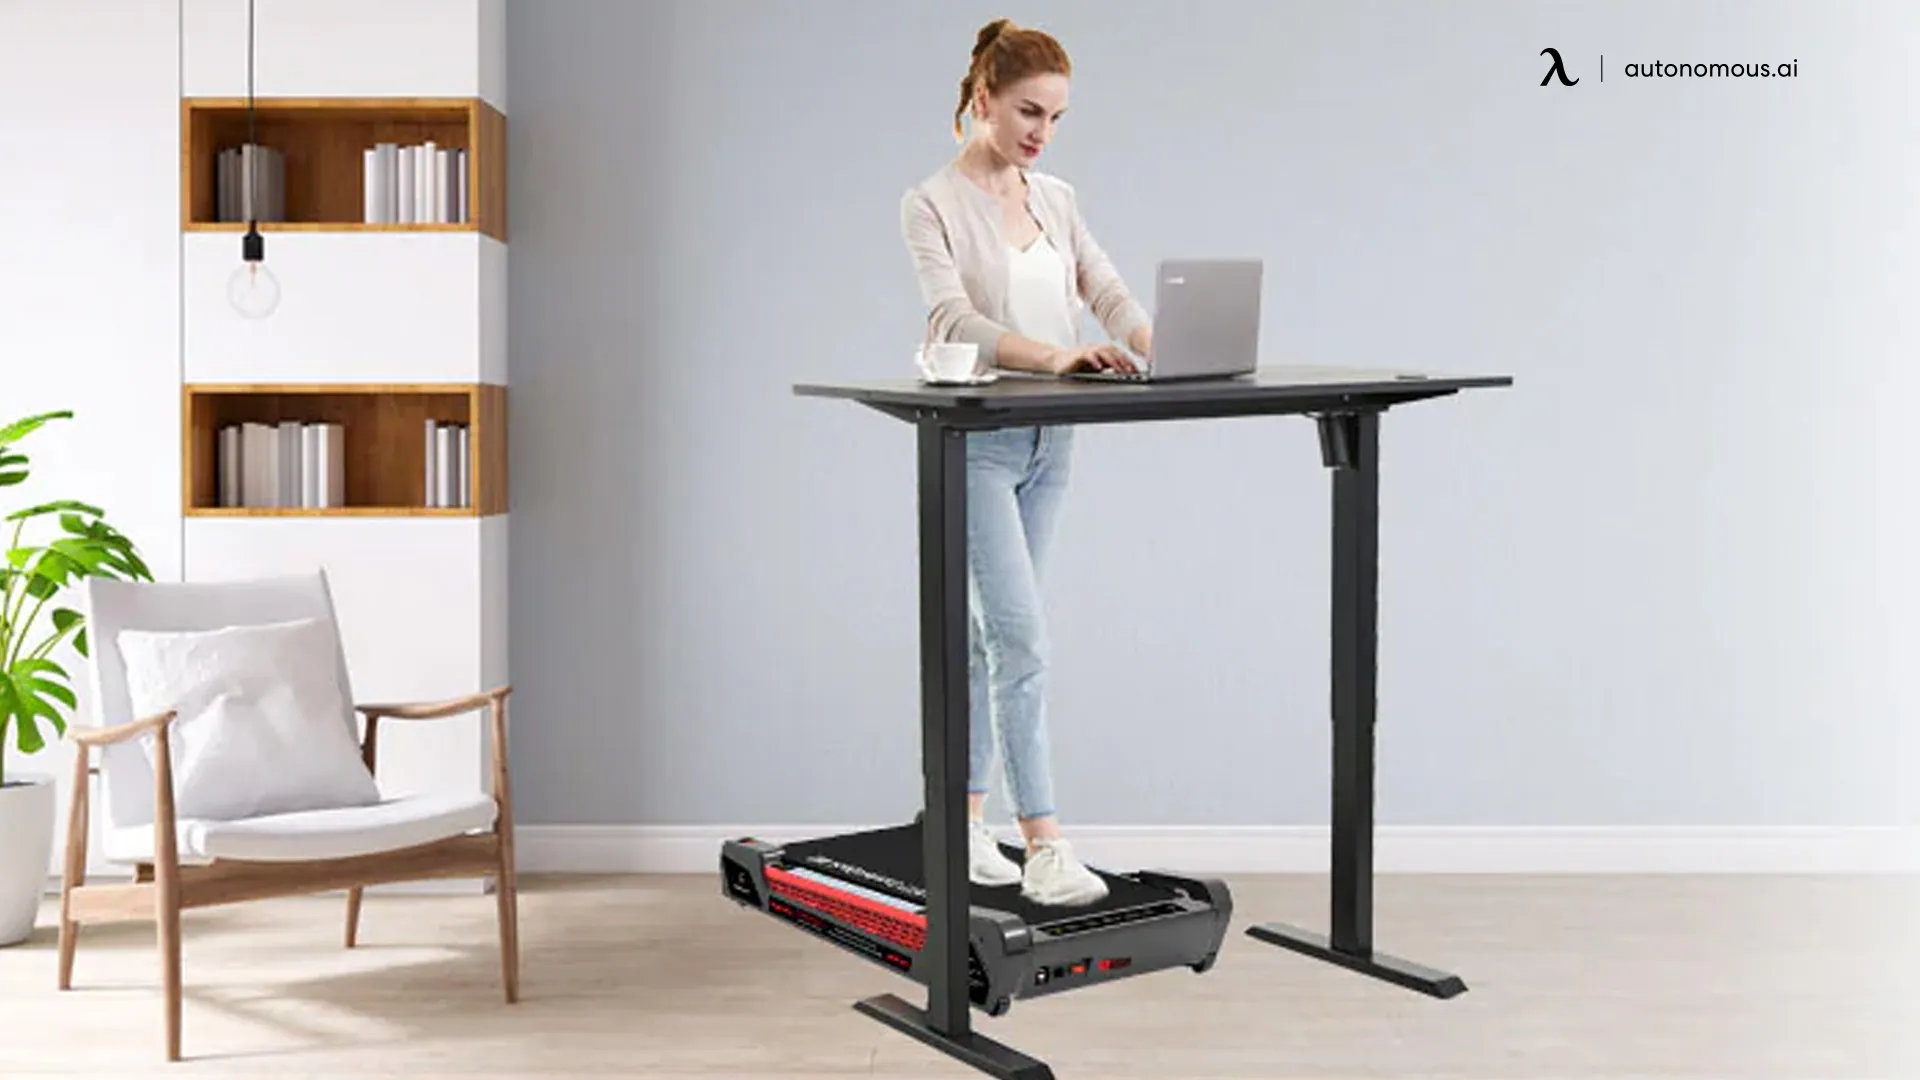 What sets a compact under desk treadmill apart from traditional fitness equipment?